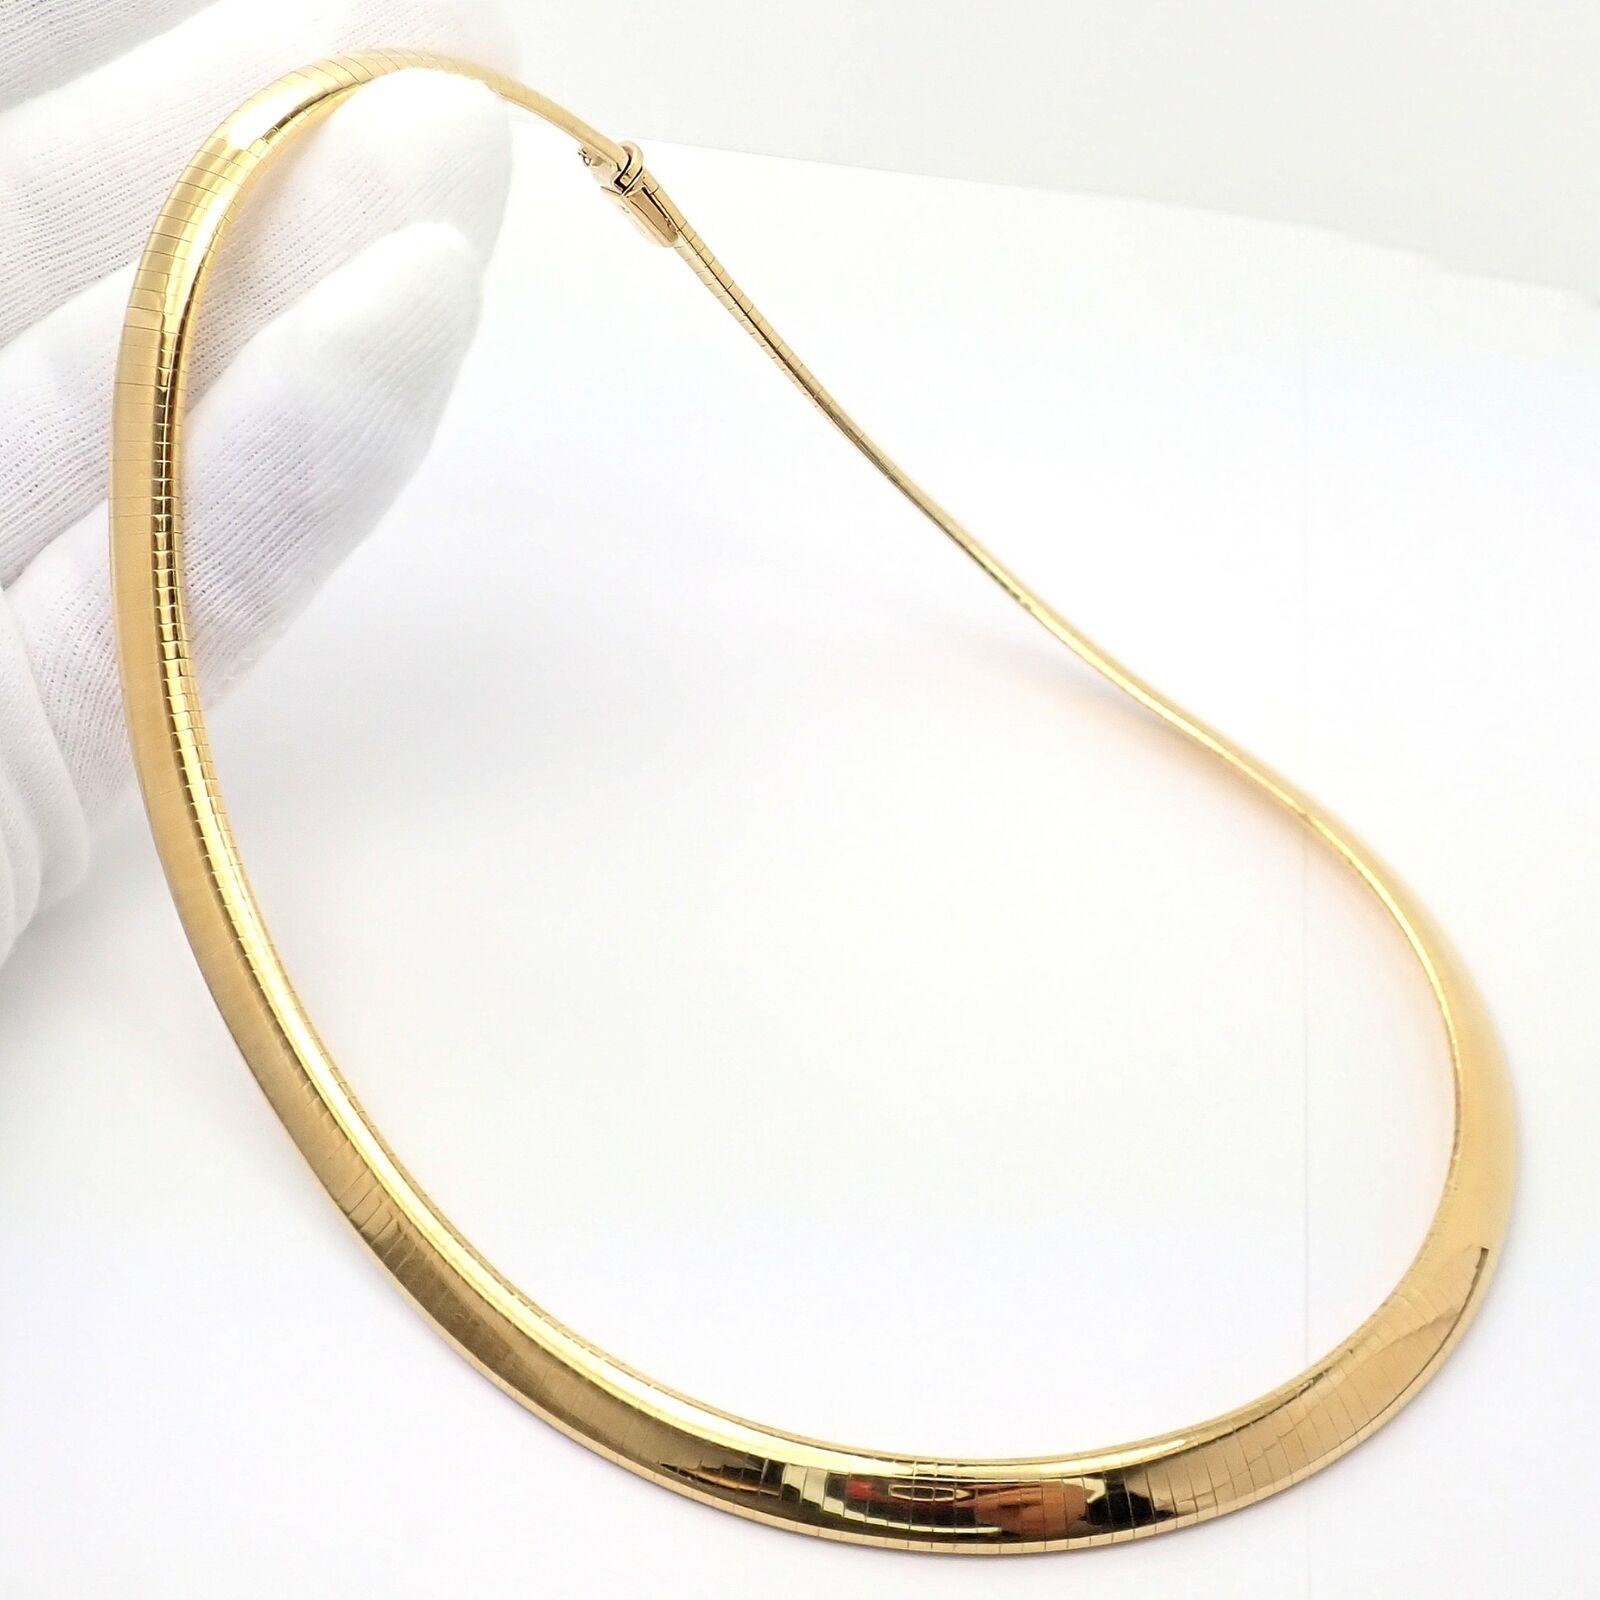 18k Yellow Gold Snake Collar Omega Chain Necklace by Van Cleef & Arpels. 
Details: 
Length: 17.5